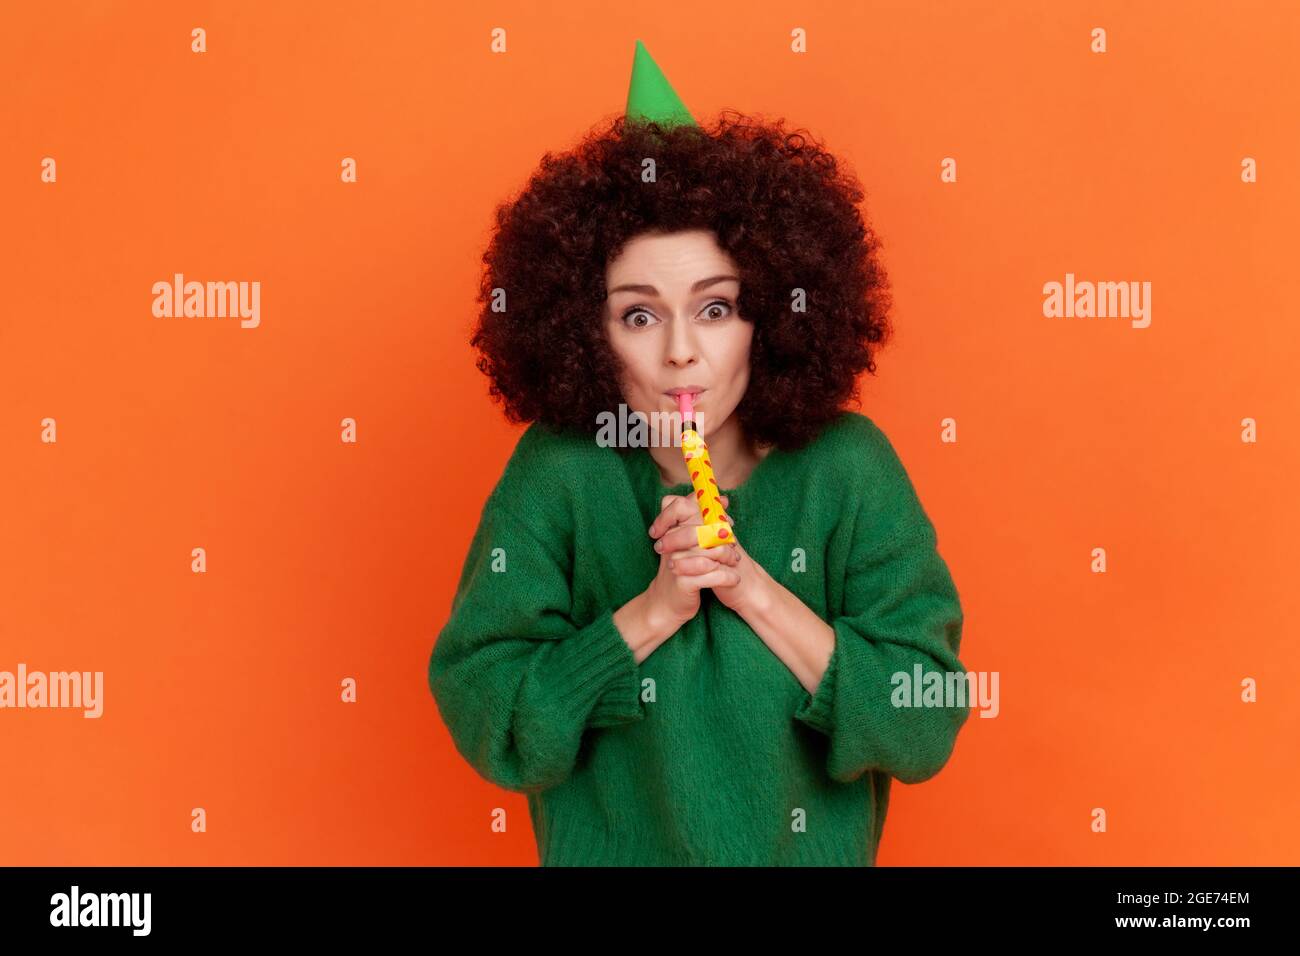 Happy birthday! Portrait of festive woman with curly hair wearing green casual style sweater and party cone blowing horn, celebrating holiday. Indoor Stock Photo